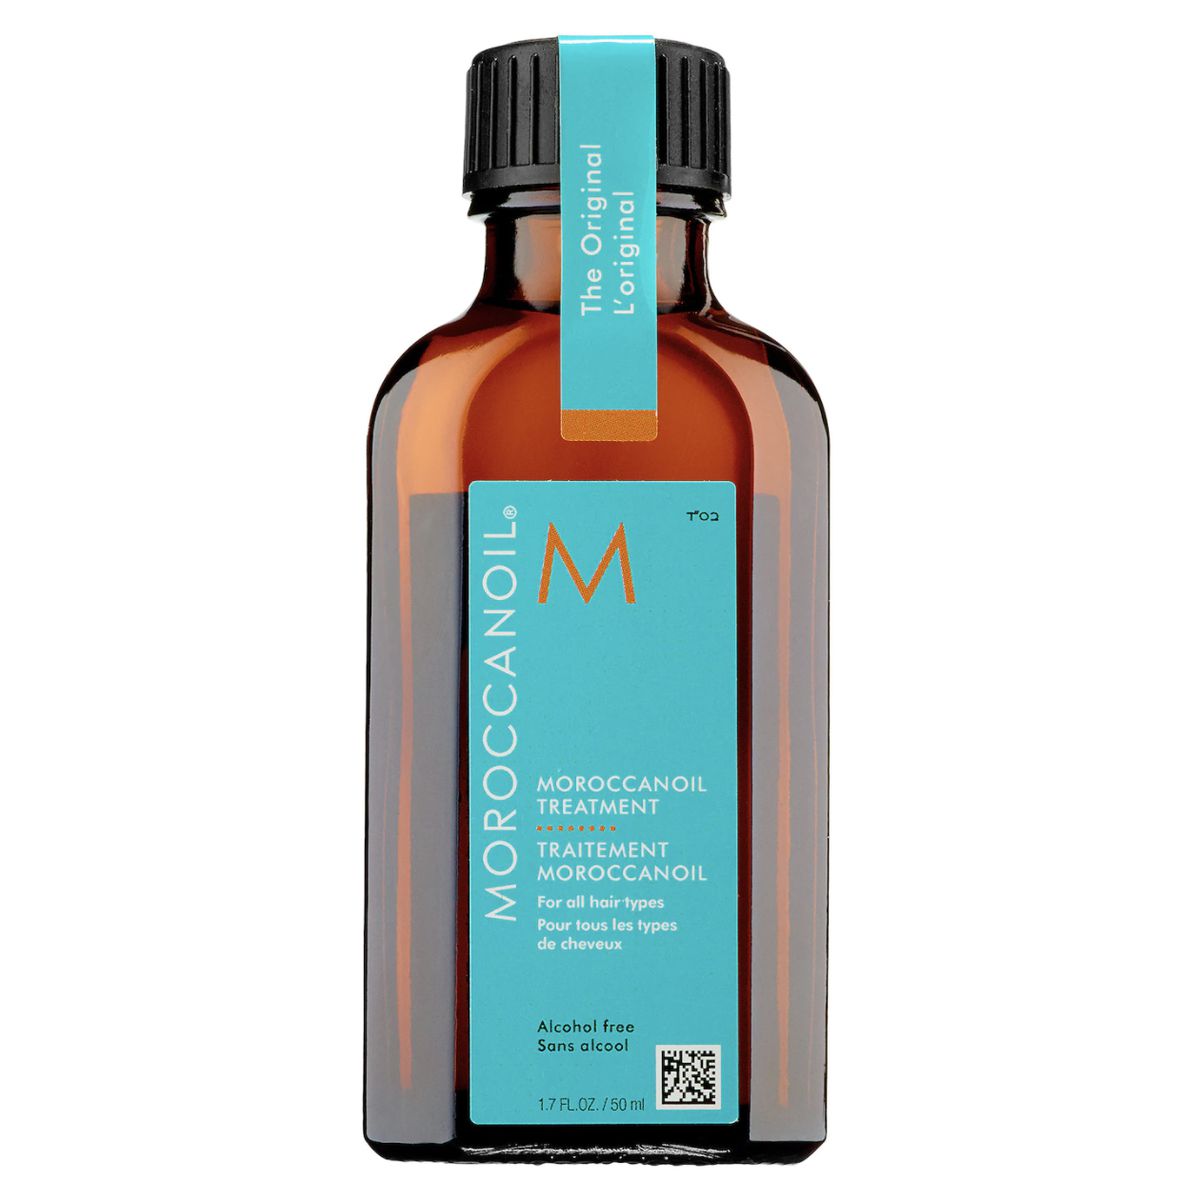 Best for Curly Hair: Moroccanoil Treatment